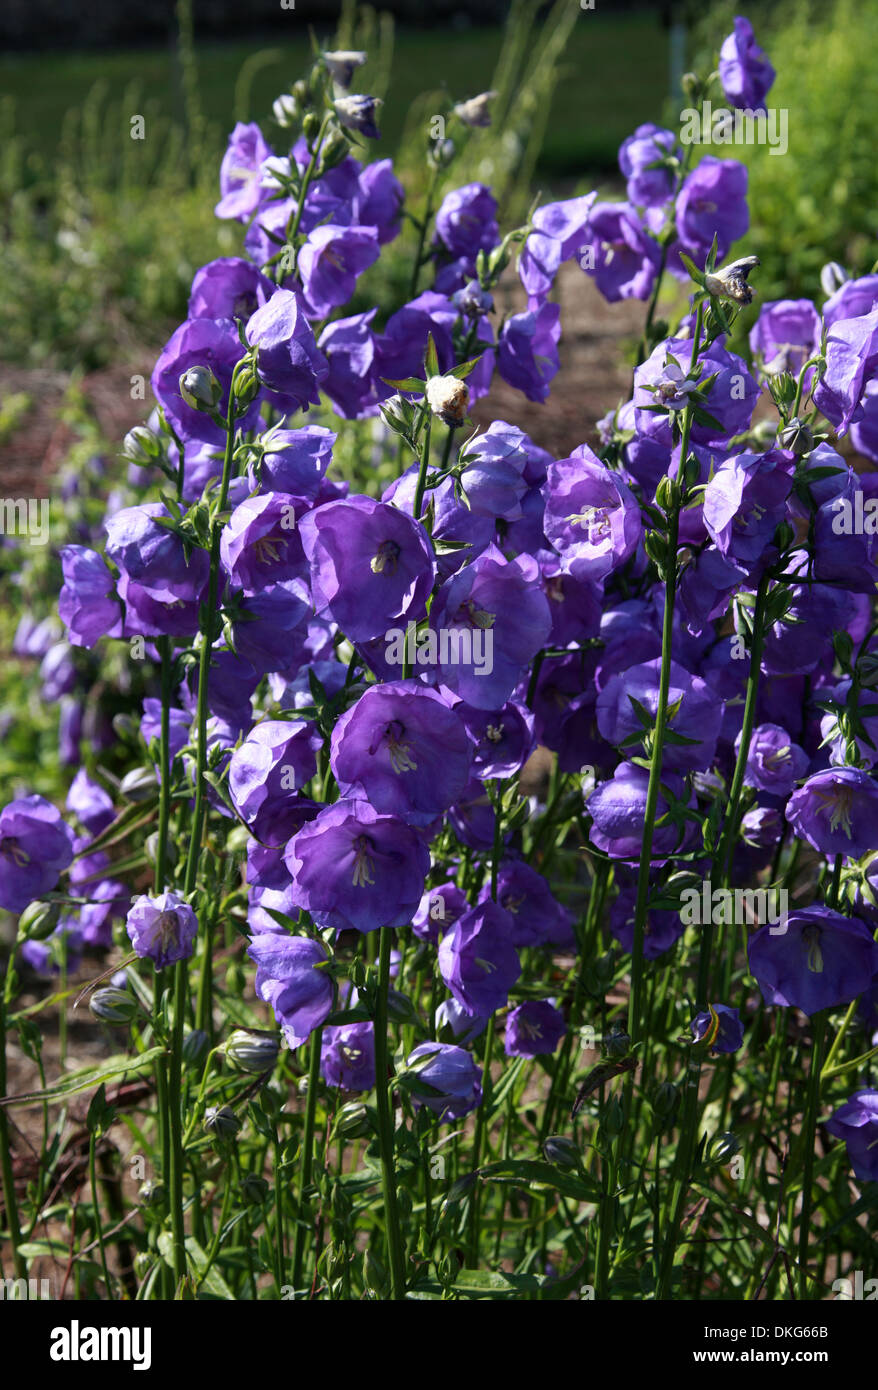 Peach-leaved Bellflower, Campanula persicifolia 'Azure Beauty', Campanulaceae. Common in the Alps and other mountains in Europe. Stock Photo